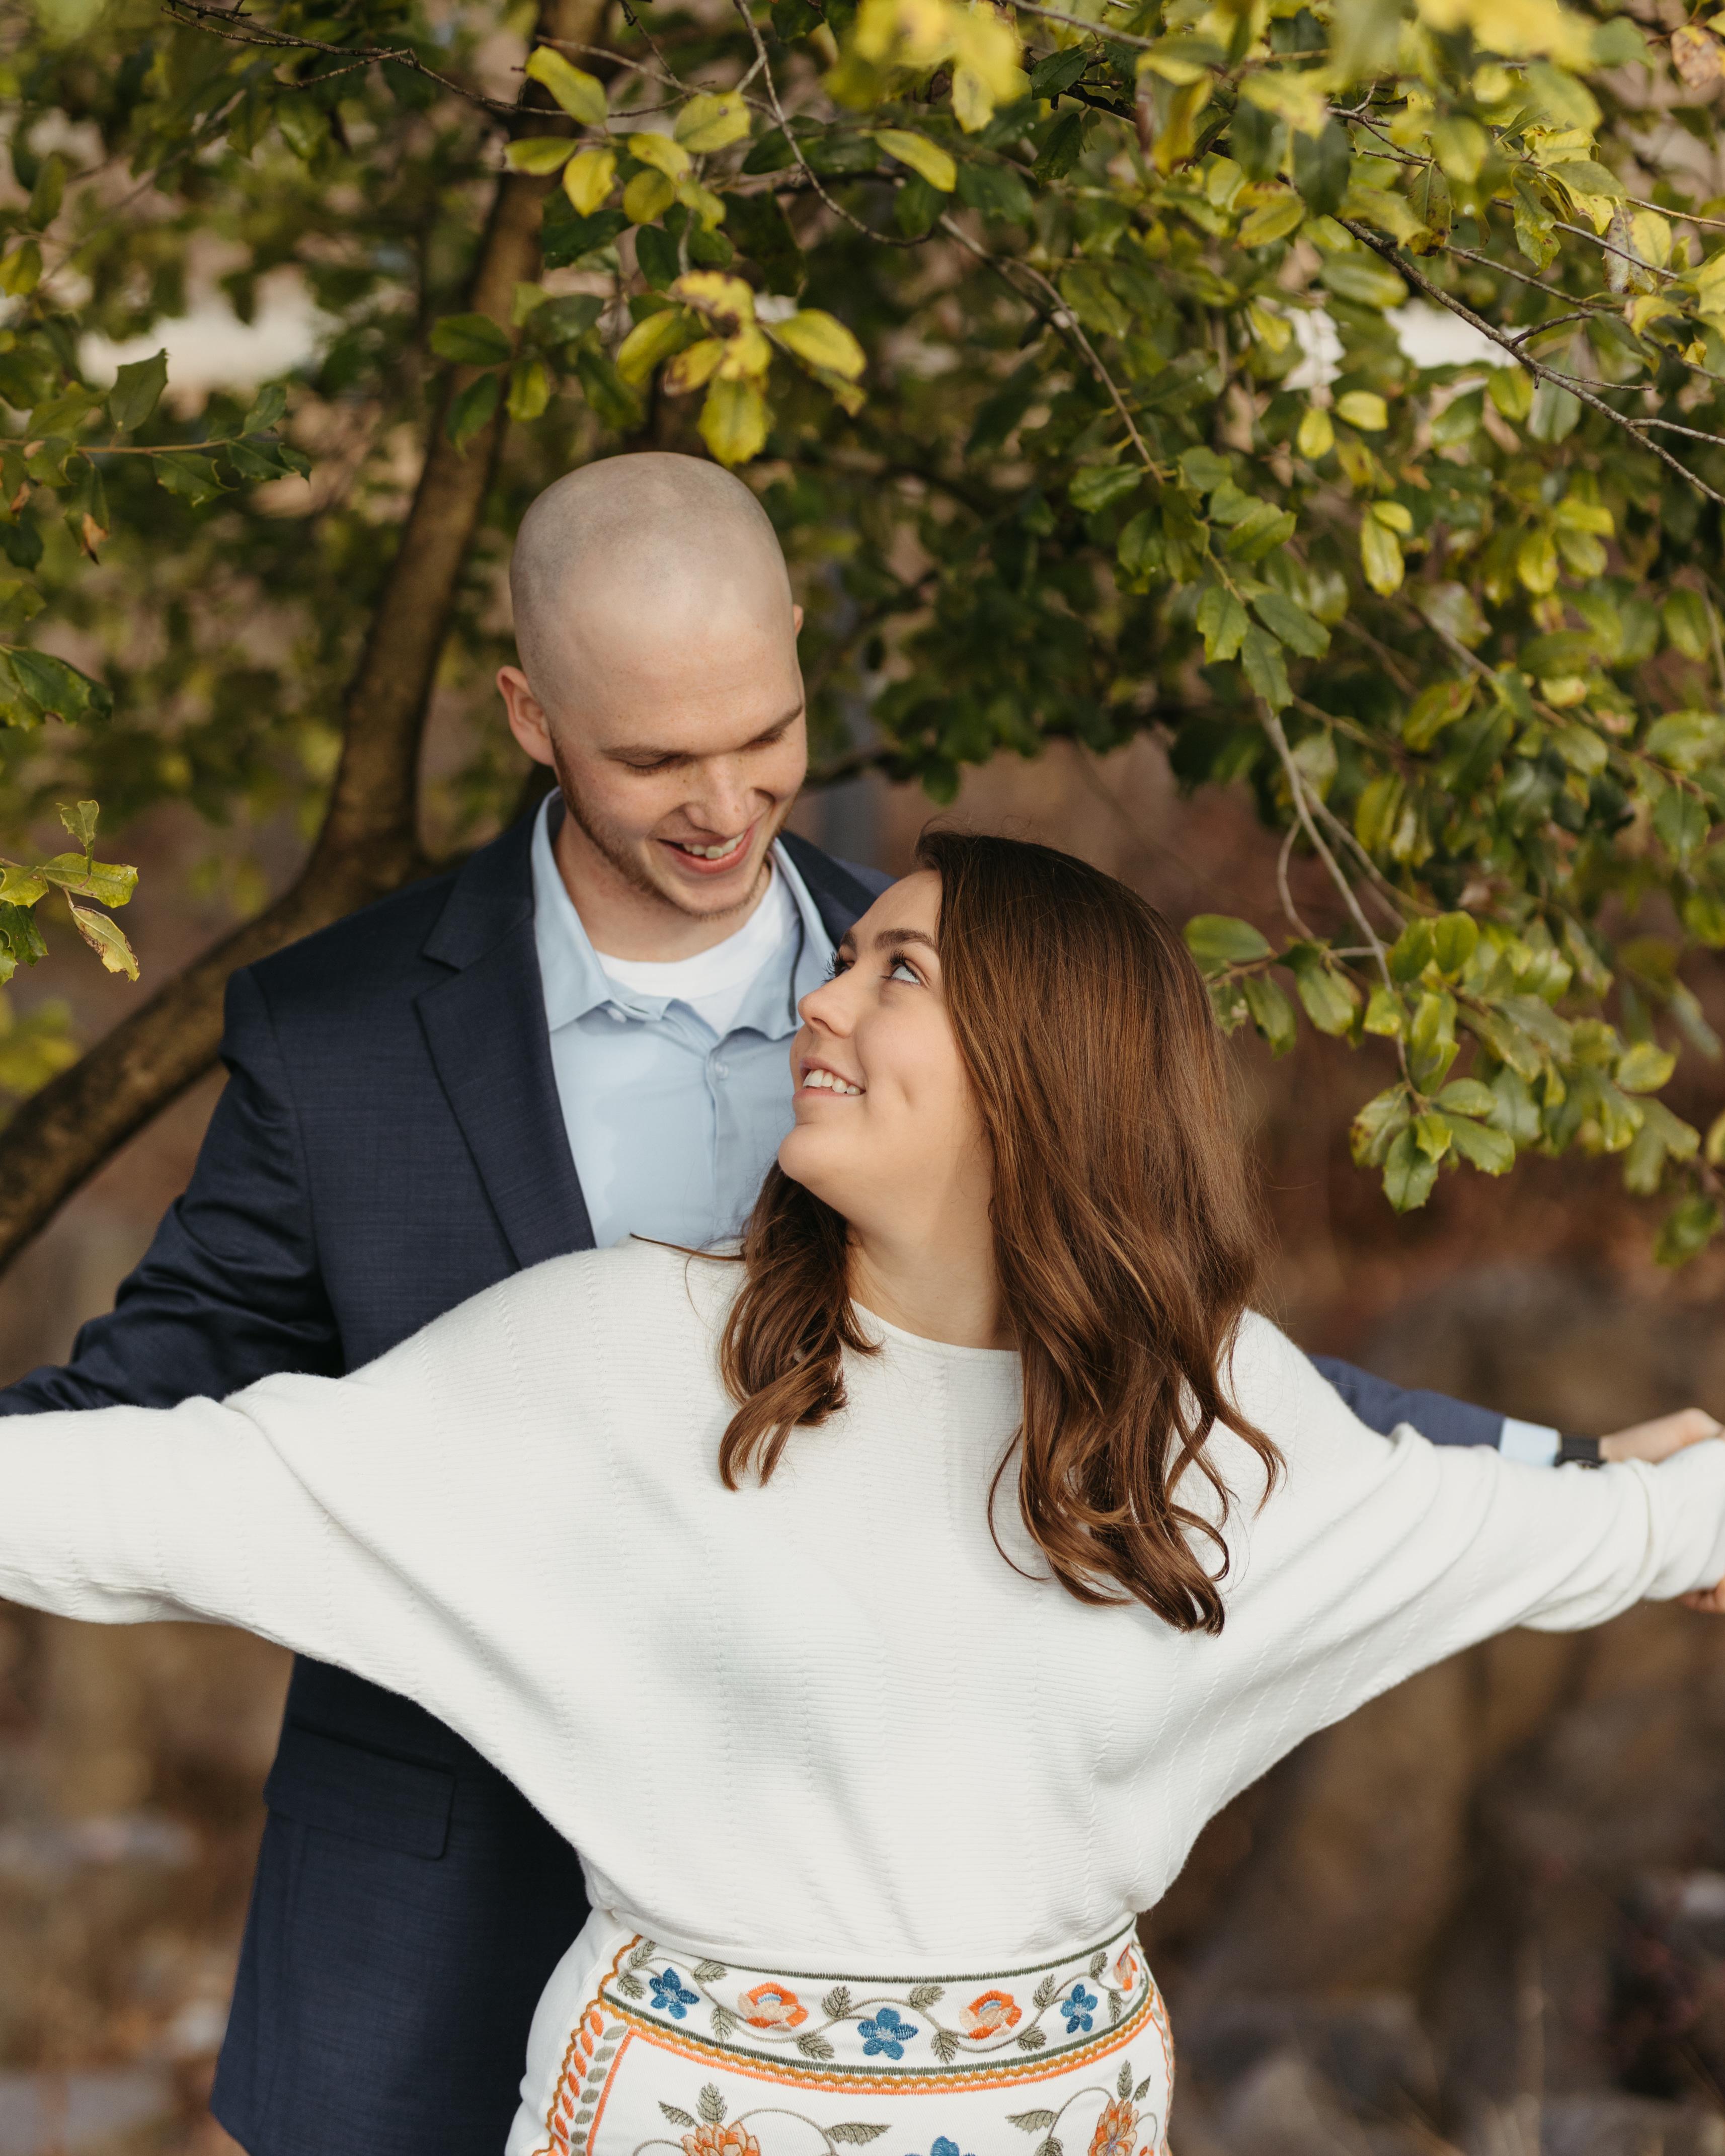 The Wedding Website of Emma Miller and Cody Graves